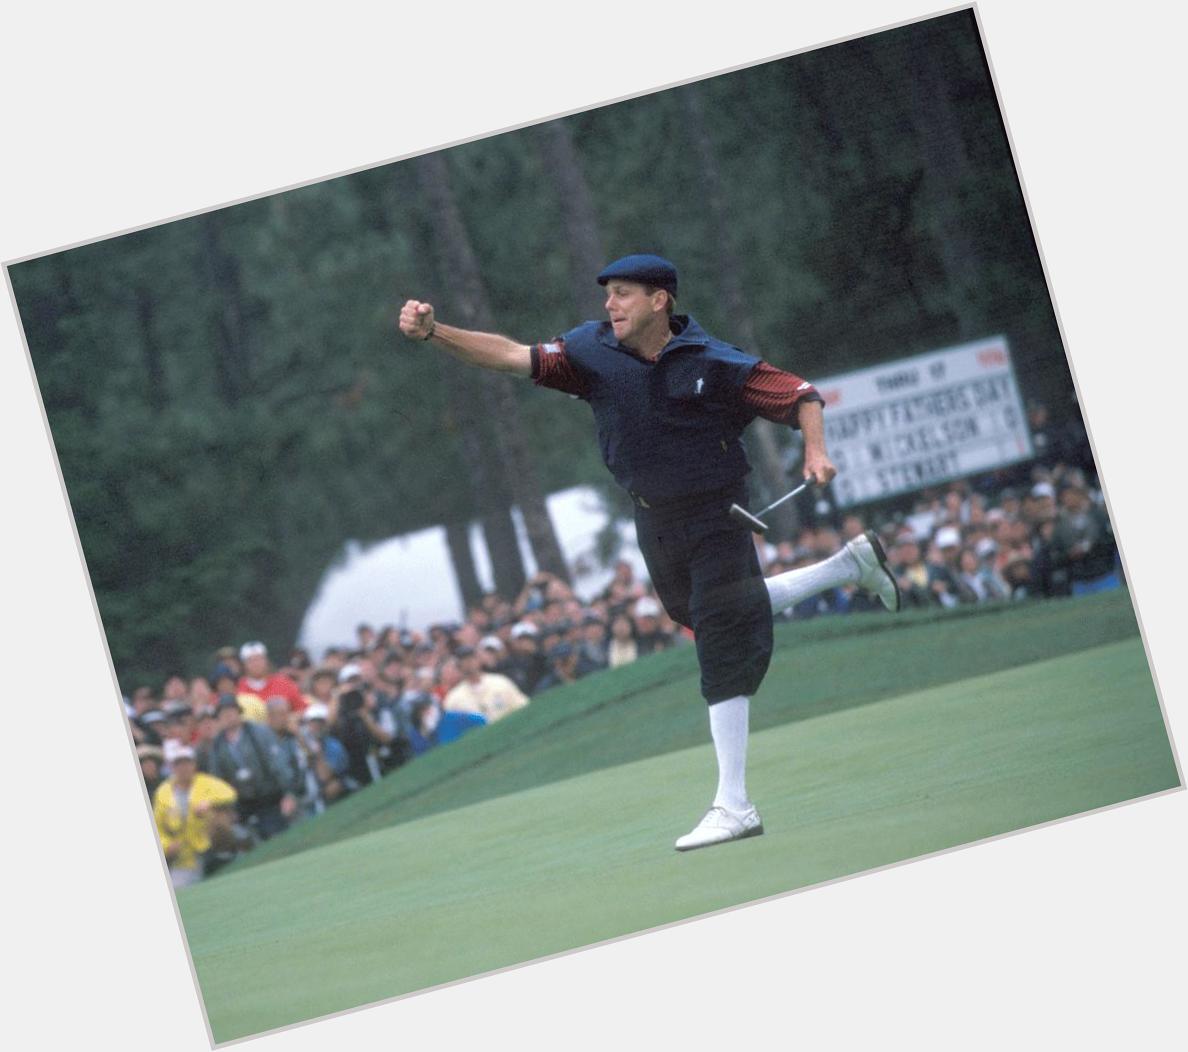 Happy birthday Payne!

Payne Stewart would have been 58 today 